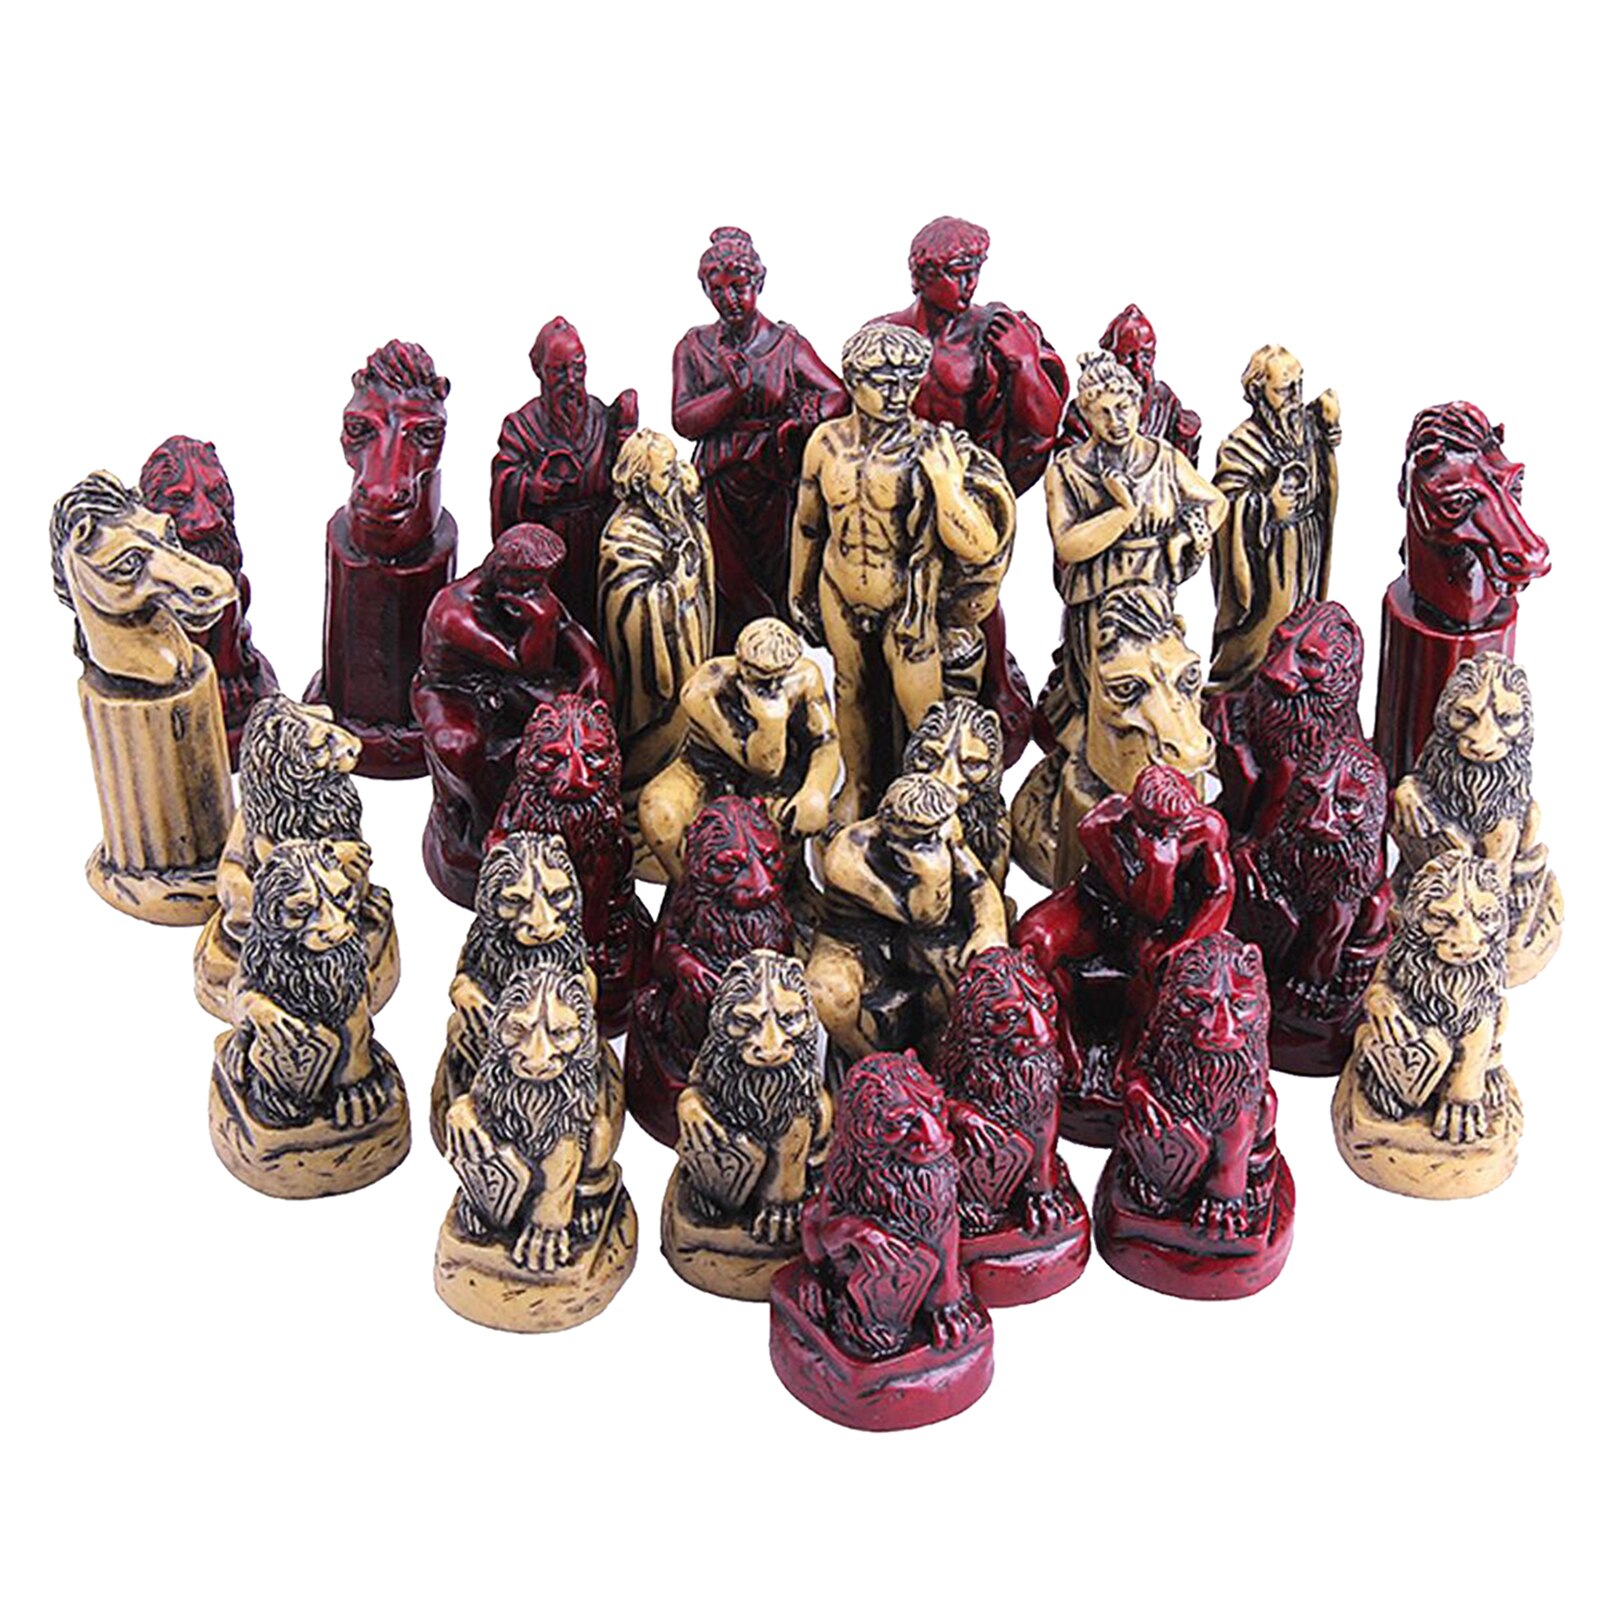 32x Resin Chess Pieces Portable Antique Roman Chess Set for Travel Party Game